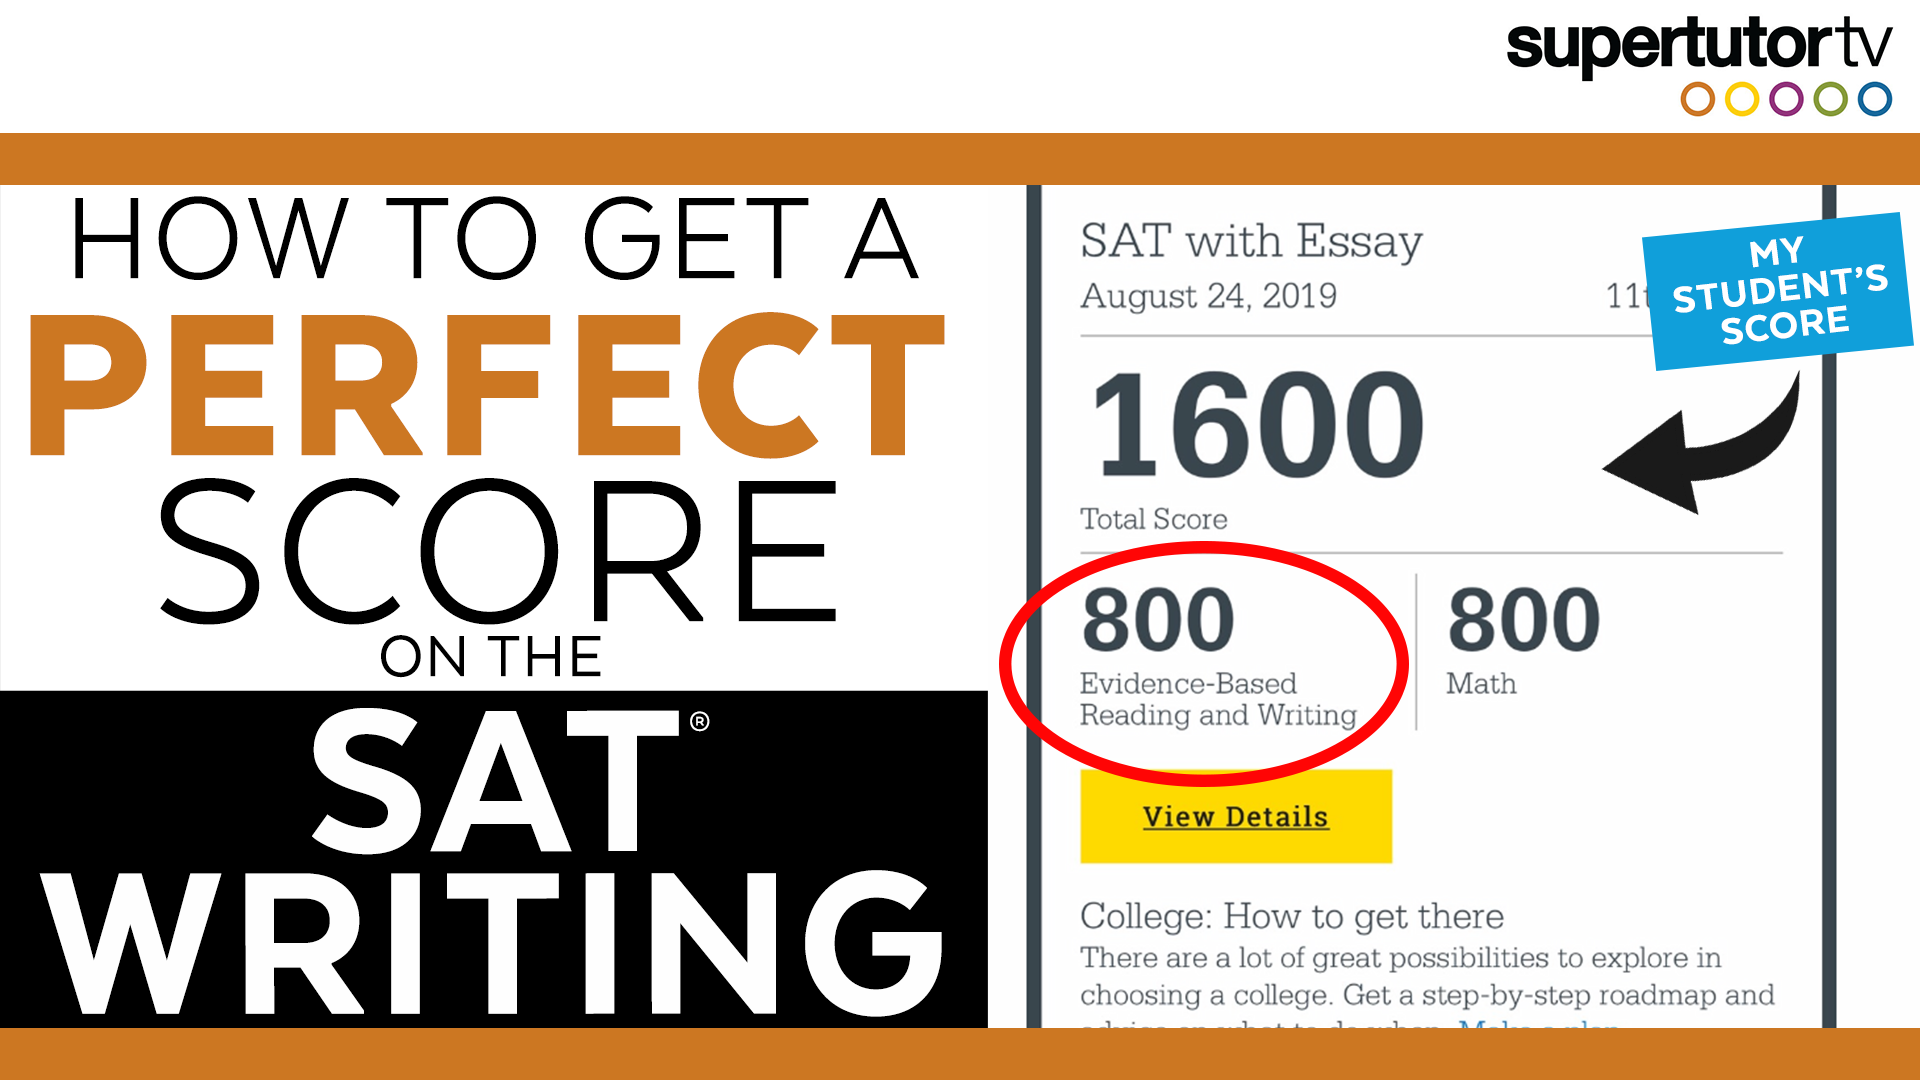 how-to-get-a-perfect-score-on-sat-writing-supertutortv